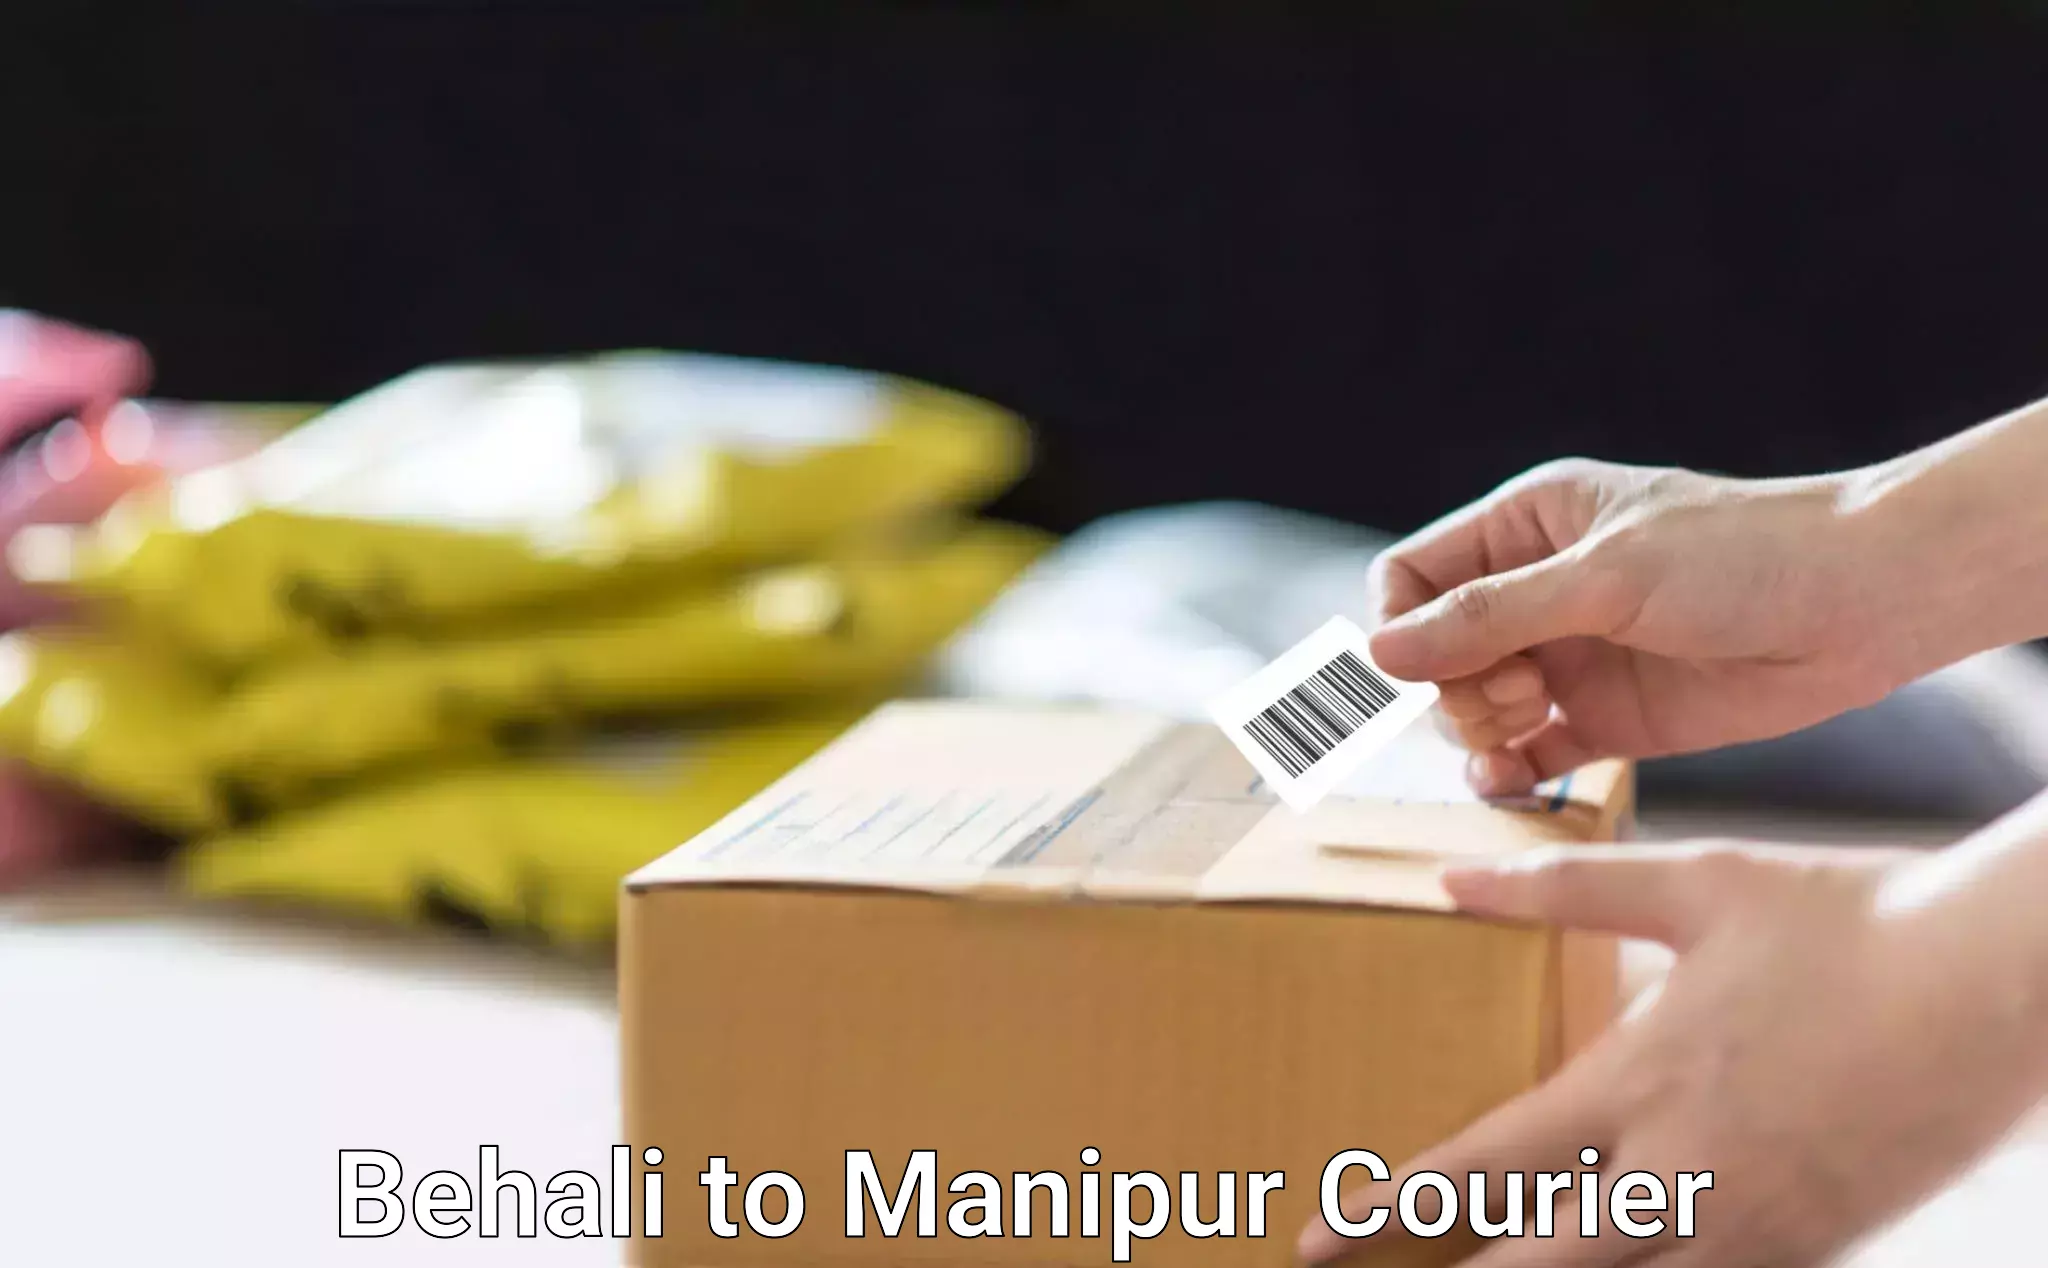 Advanced shipping network Behali to Manipur